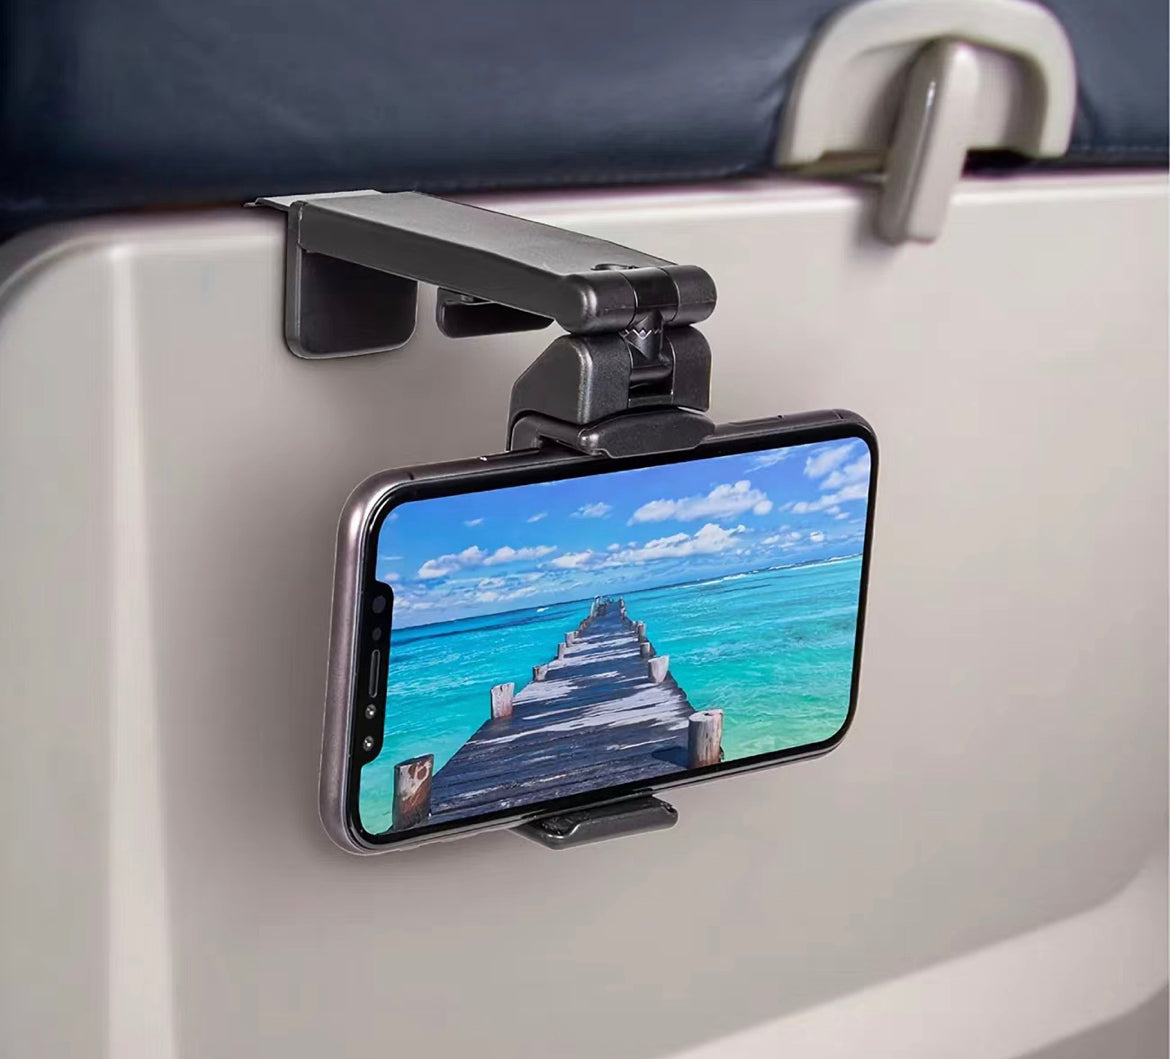 On Sale- Airplane Tray Table Cellphone Mount with 360 degree rotation